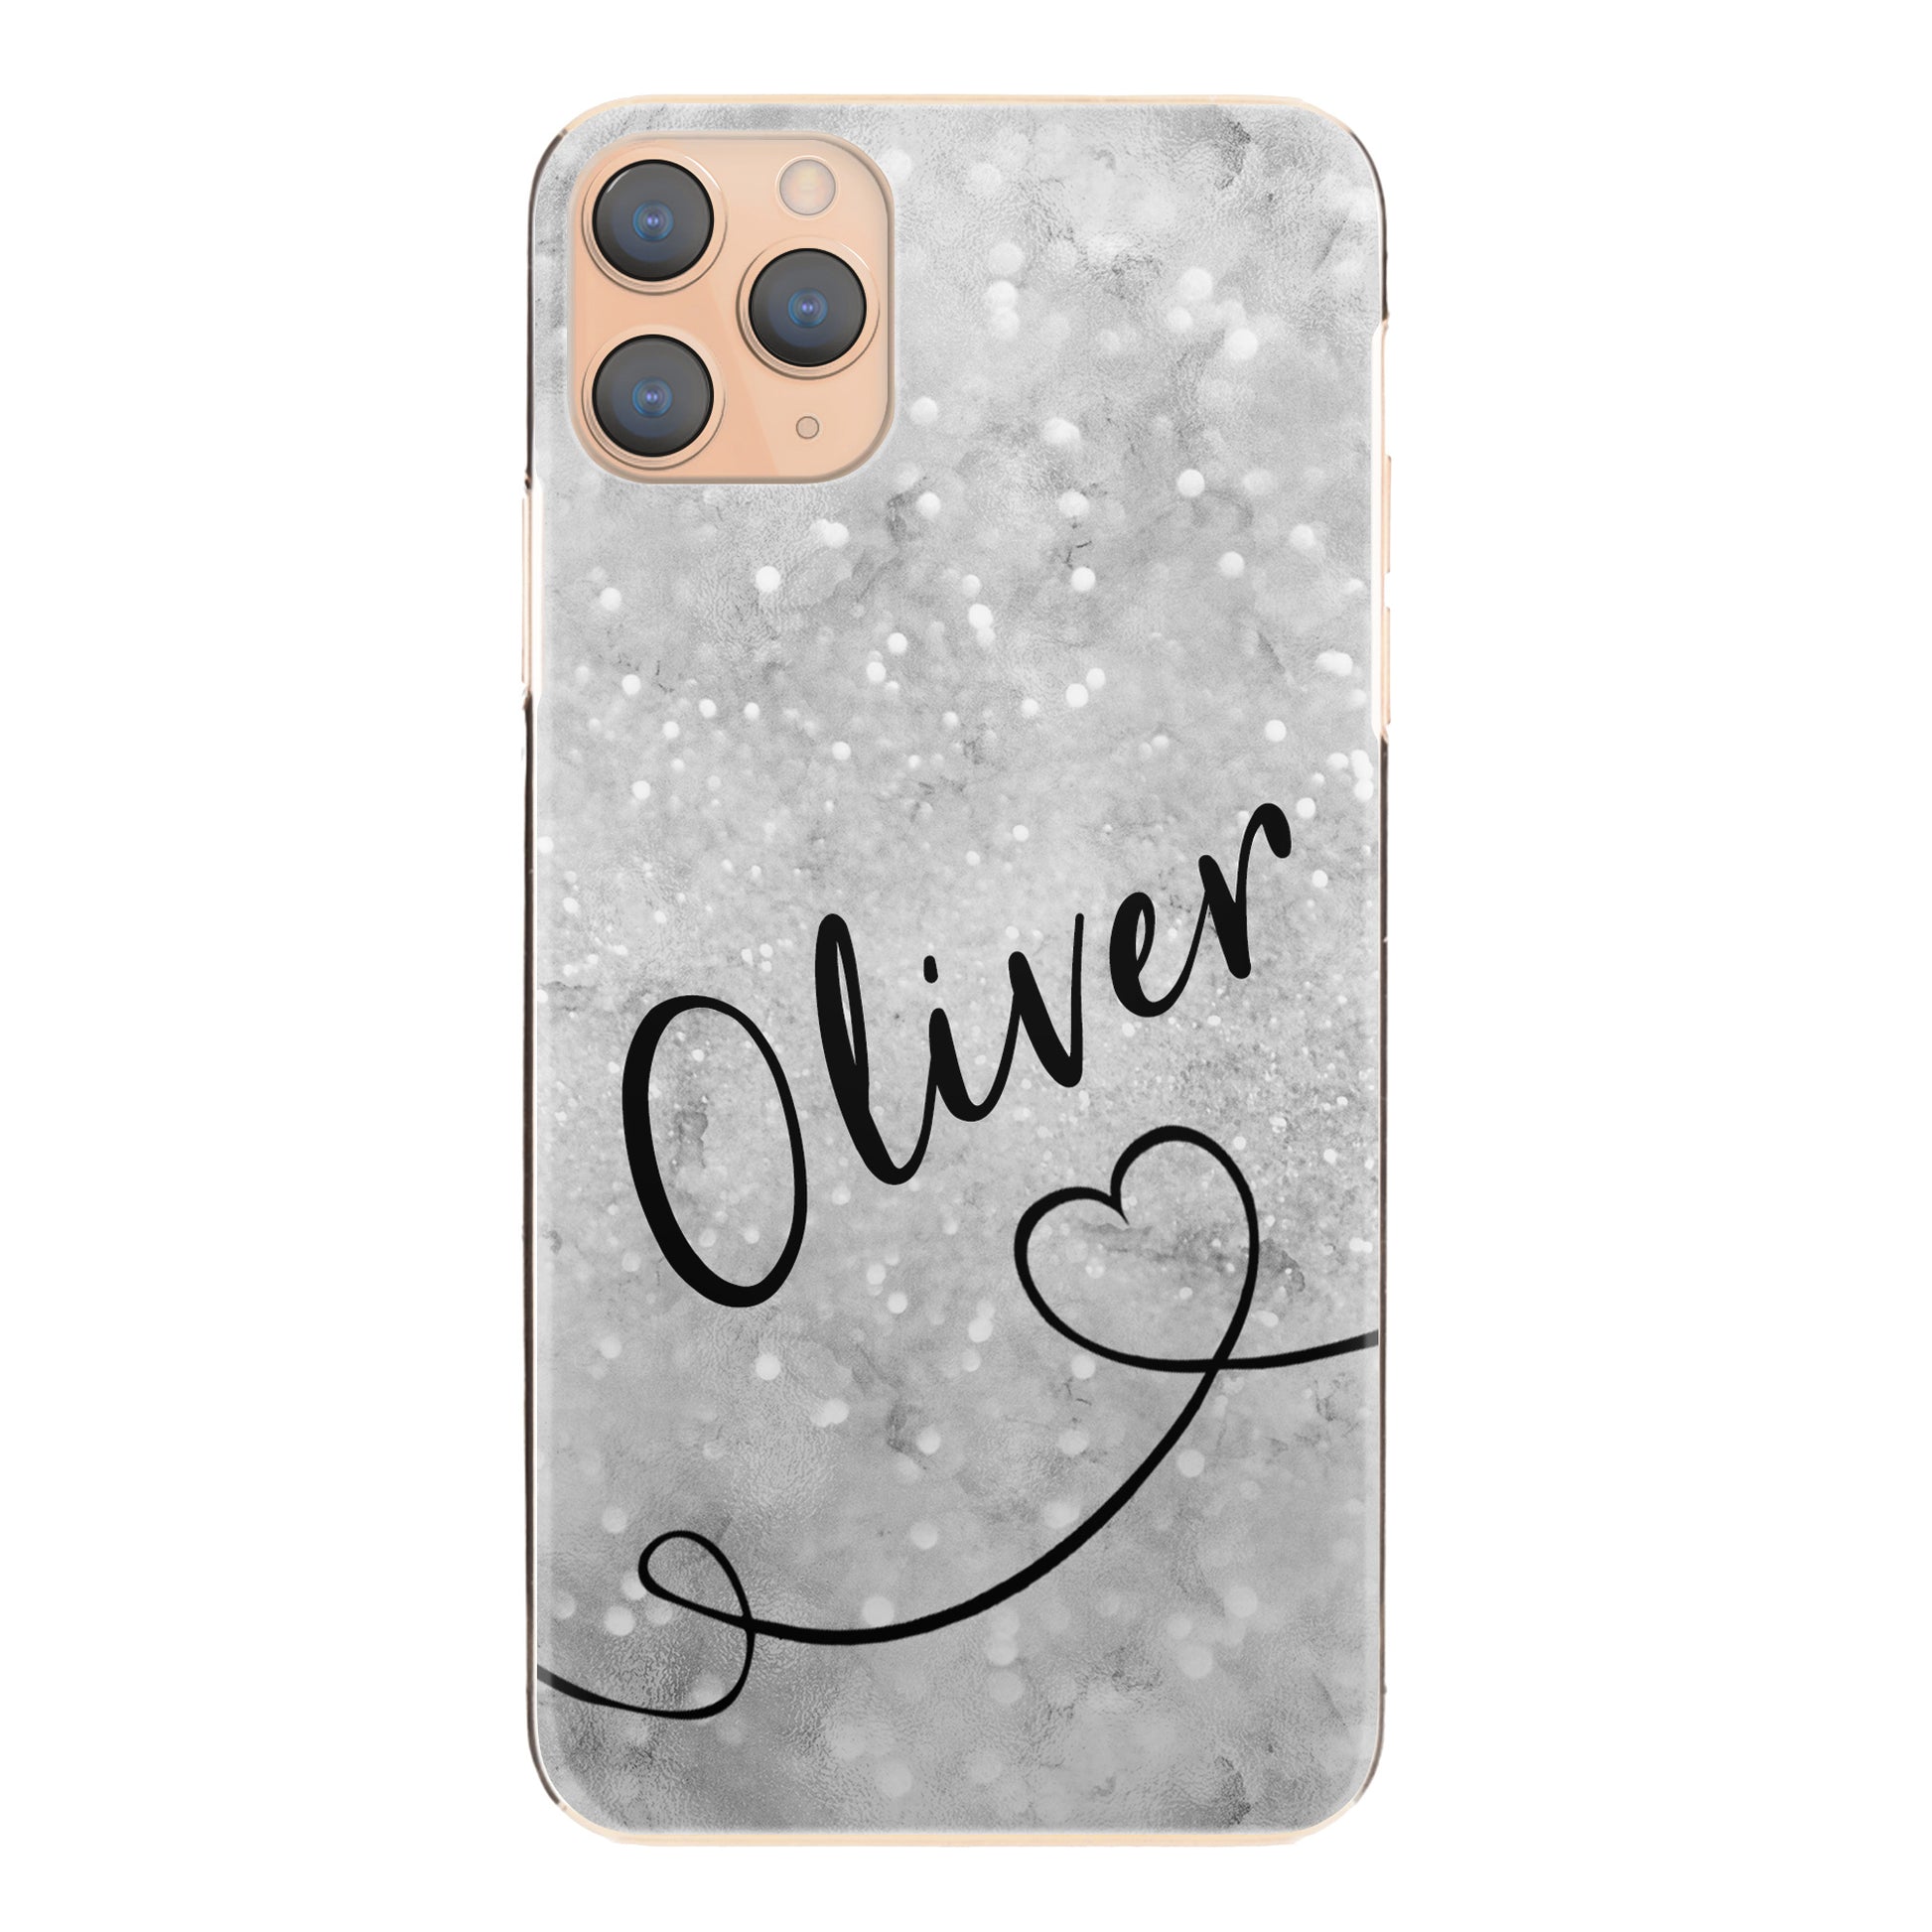 Personalised Sony Phone Hard Case with Stylish Text and Heart Line on Textured Grey